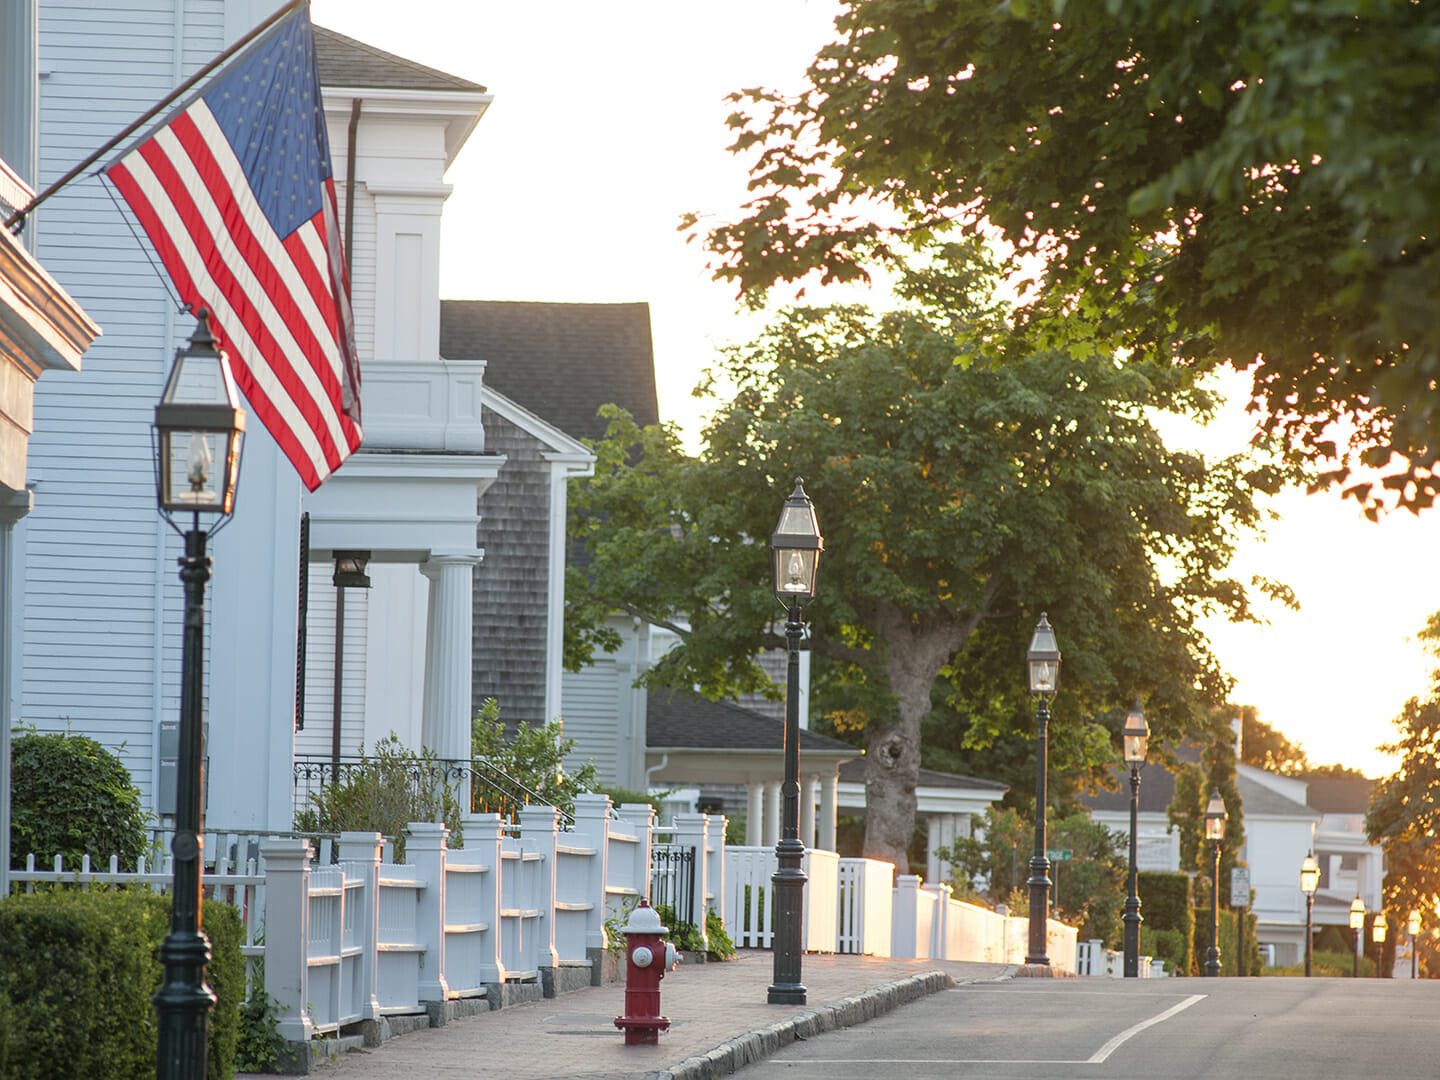 a street with lamps and an american flag